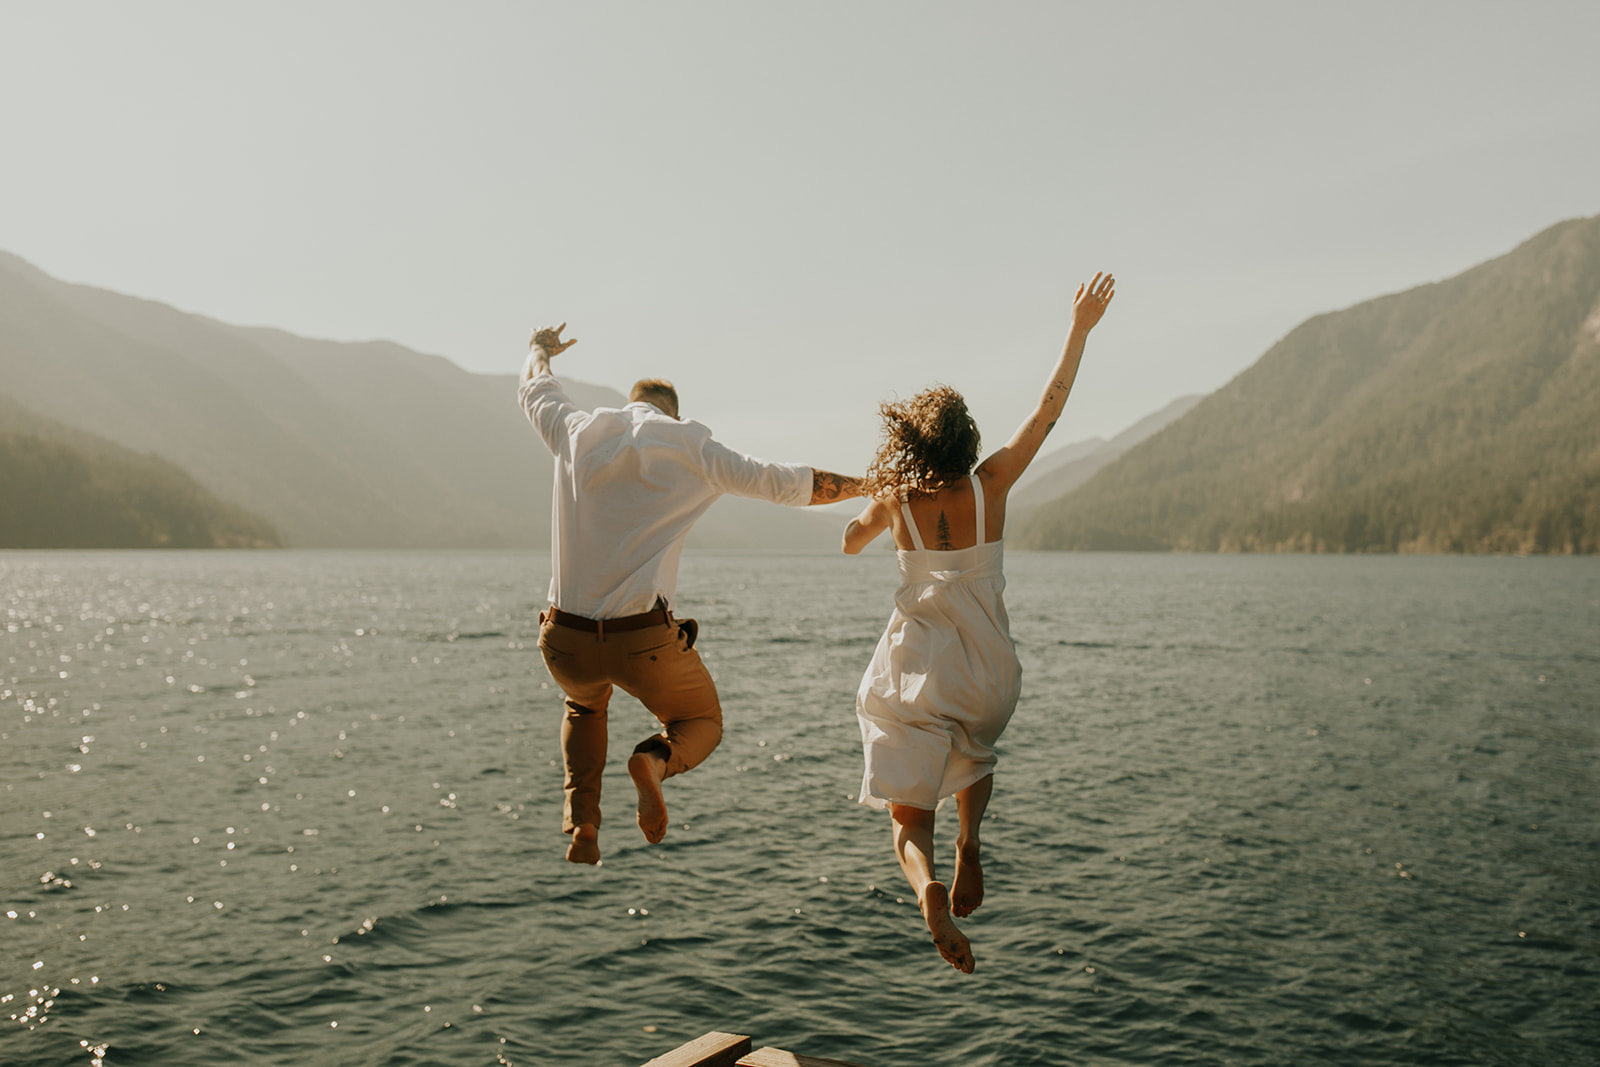 Surprise proposal in Olympic National Park and Lake Crescent